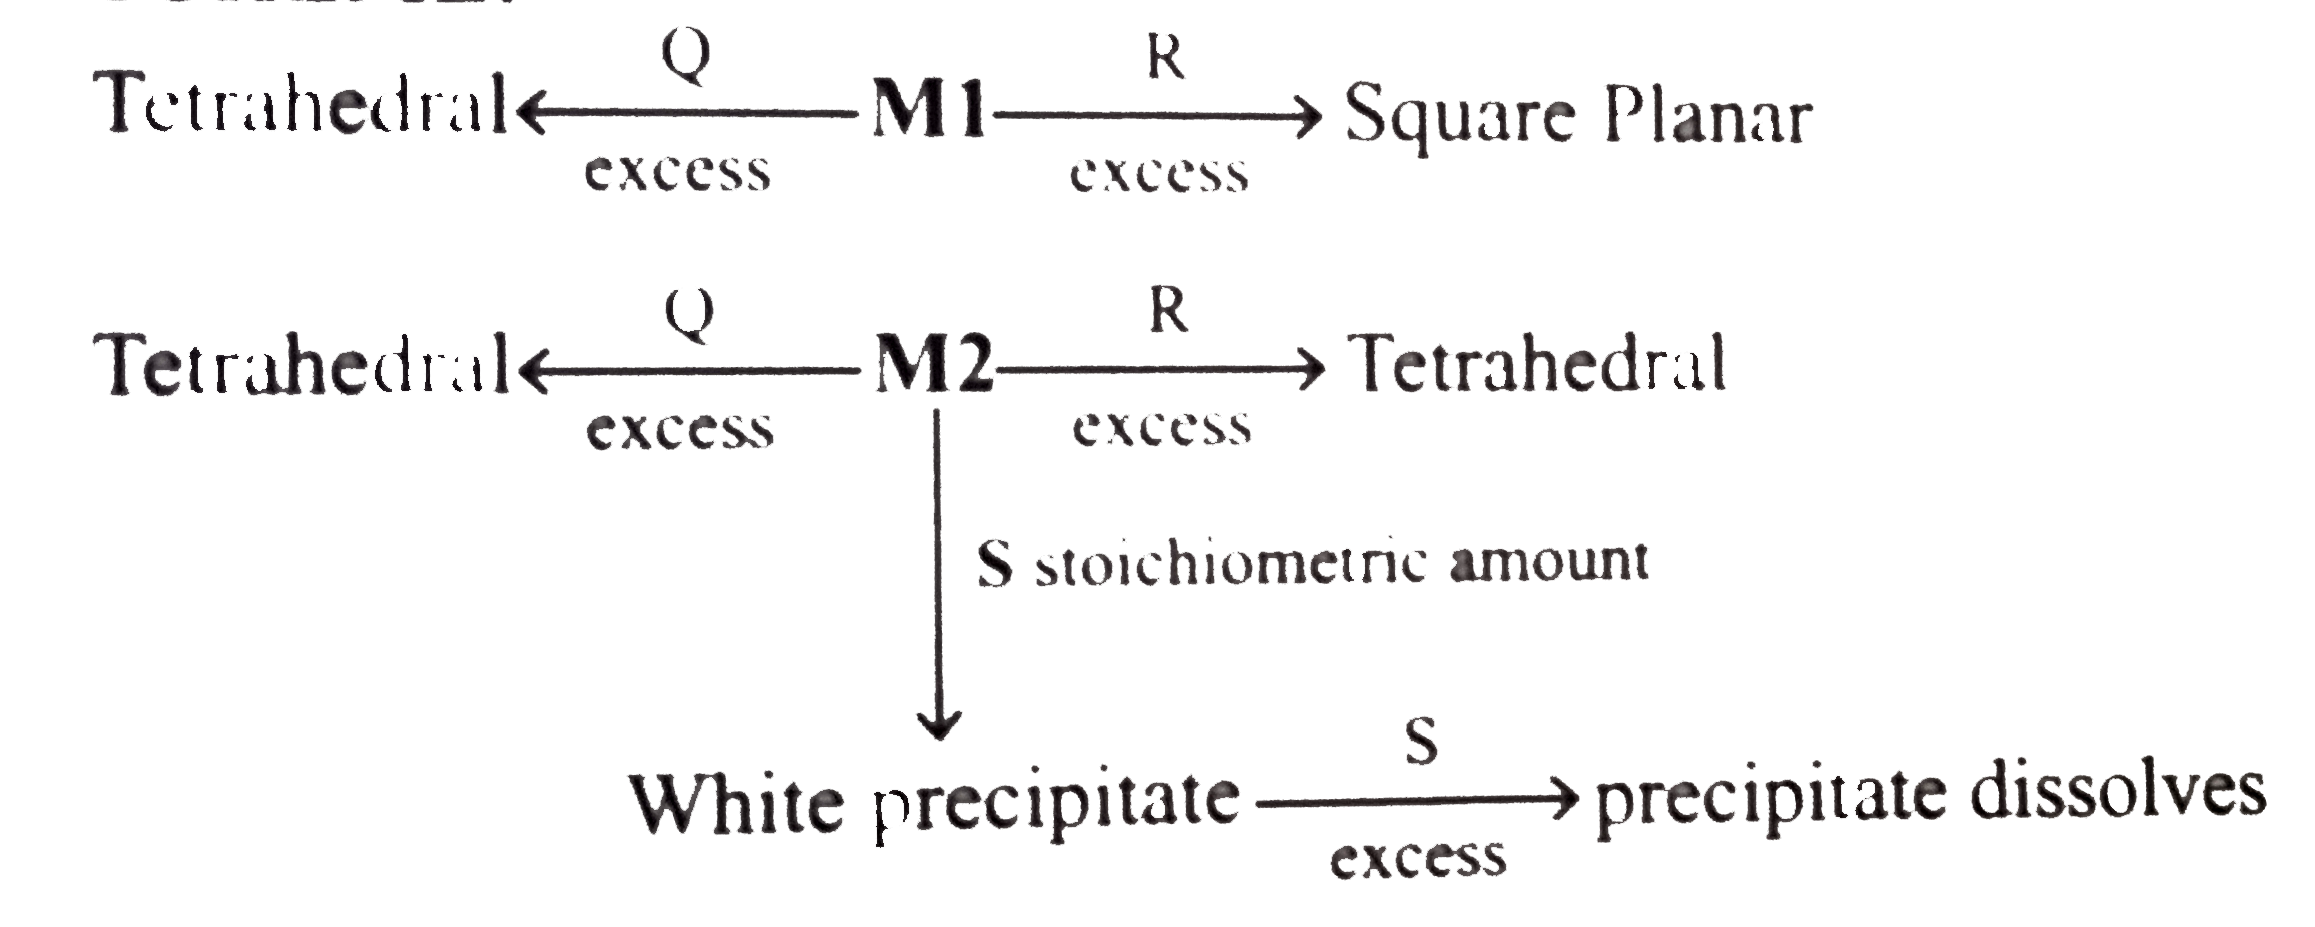 An aqueous solution of metal ion MI reacts separately with reagents Q and R in excess to give tetrahedral and square planar complexes, respectively An aqueous solution of another metal ion M2 always forms tetrahedral complexs with theses reagents. Aqueous solution of M2 on reaction with reagent S gives white precipitate which dissolves in excess of S The reactions are summarised in the scheme given below:  SCHEME :      What is S?